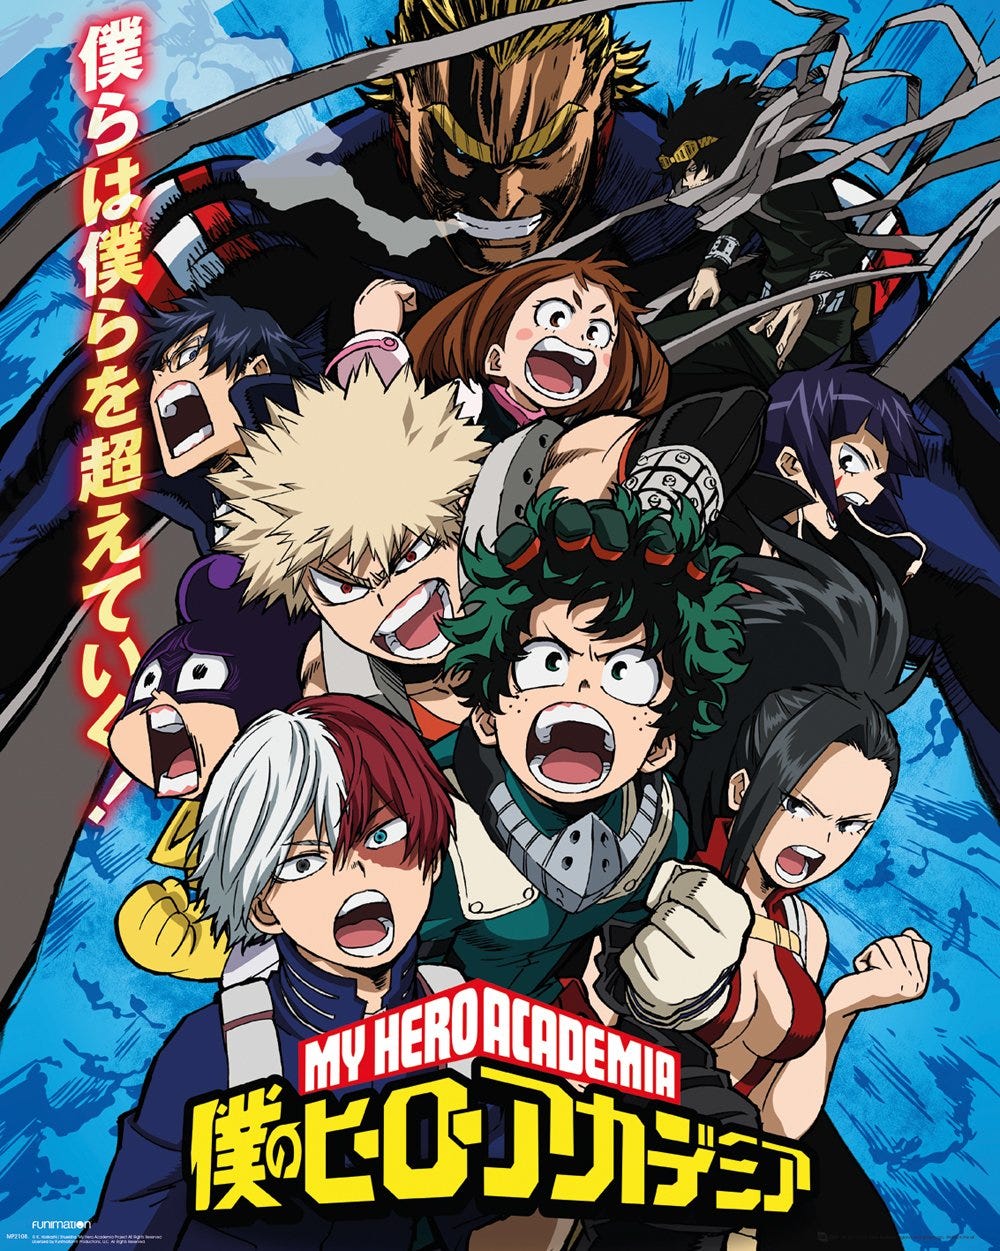 My Hero Academia: Predicting The Fate Of The Most Important Main Characters